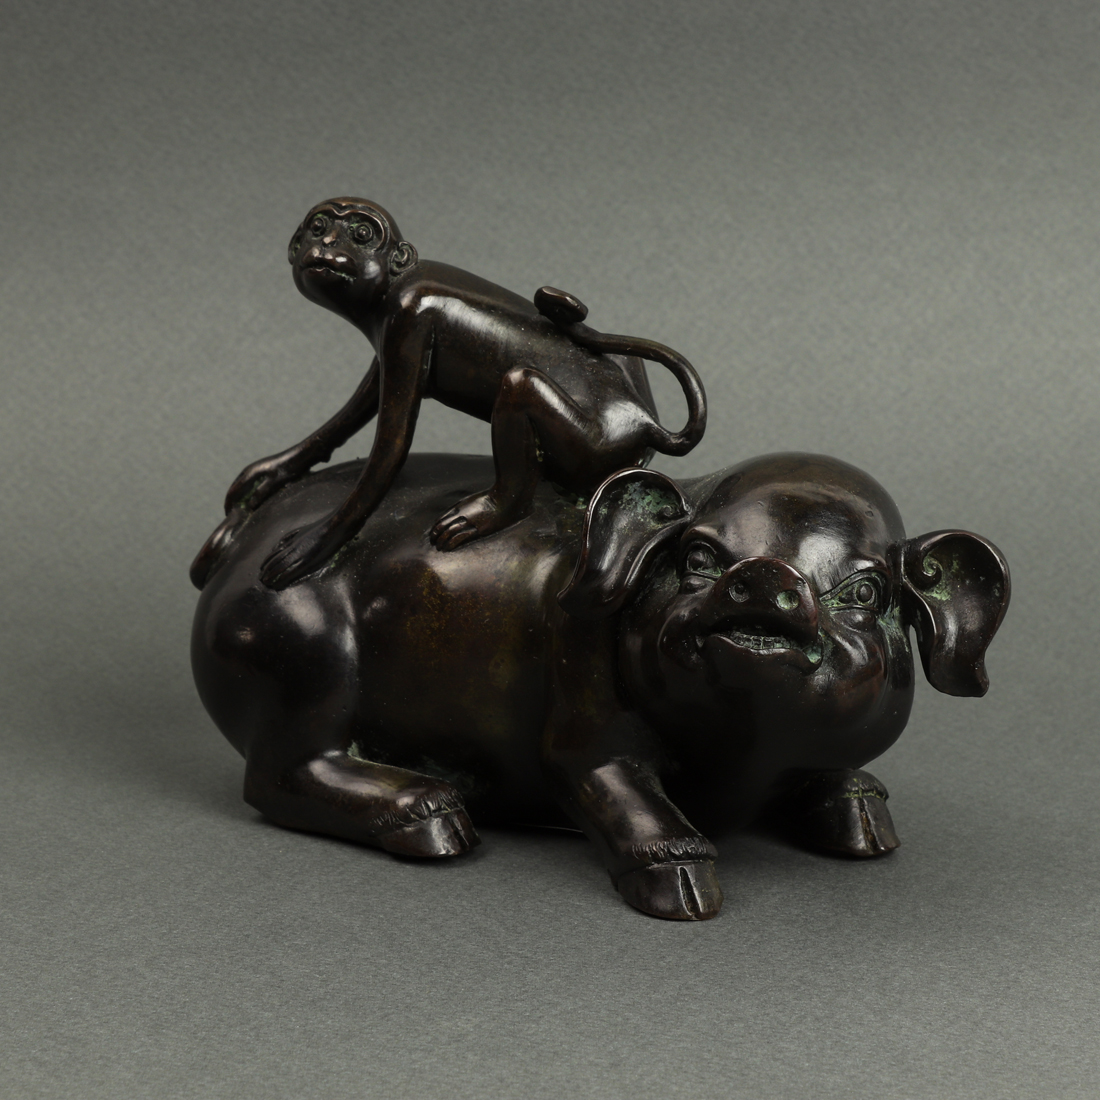 CHINESE BRONZE FIGURE OF A MONKEY 3a3c04